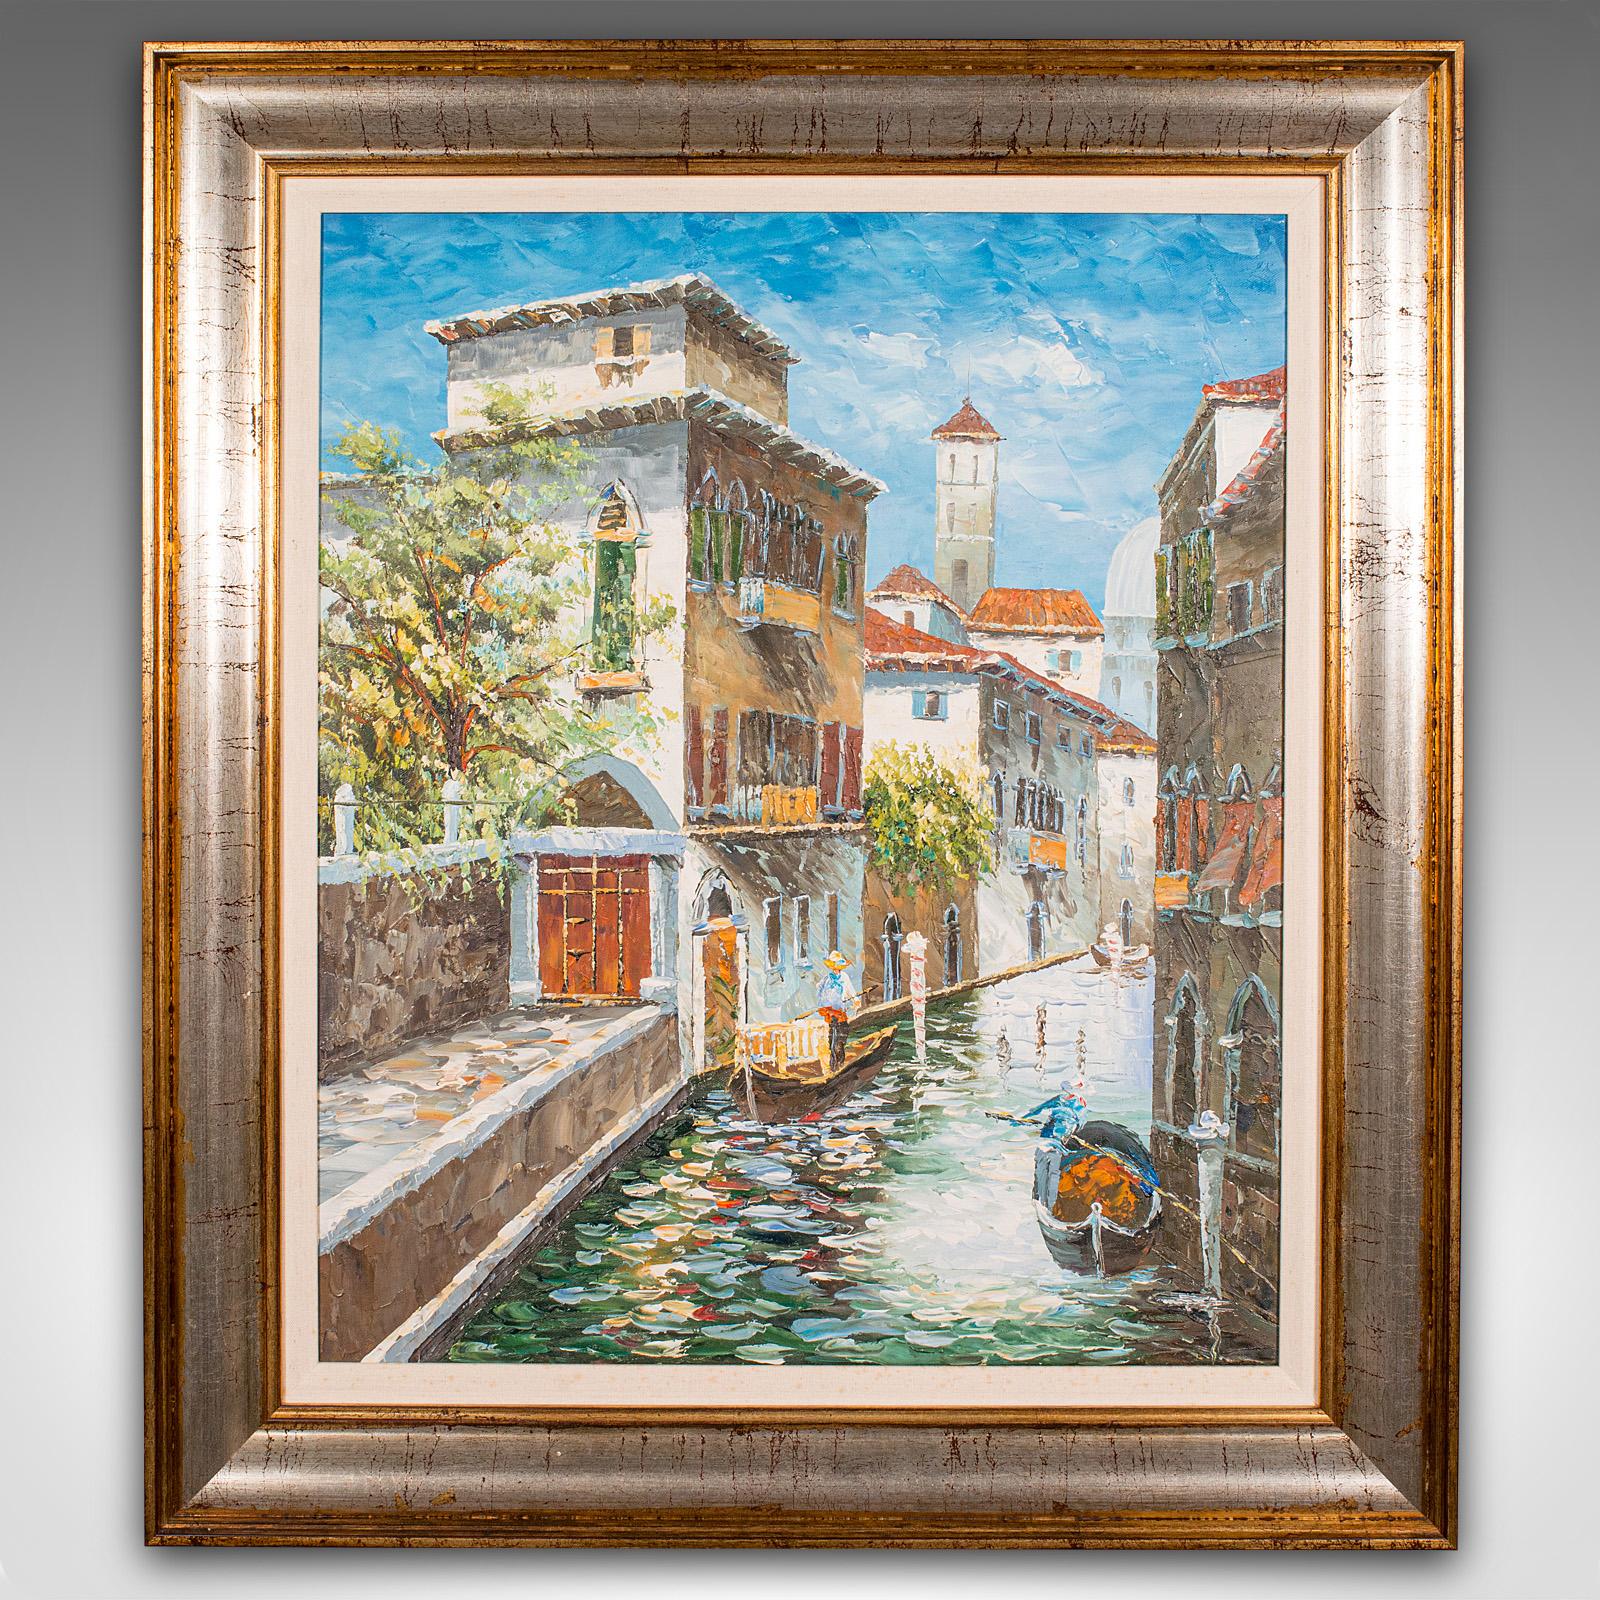 This is a vintage Venetian canal painting. A Continental school, oil on canvas study of Venice, dating to the late 20th century, circa 1980.

Appealing canal scene in oils, with great colour
Displays a desirable aged patina and in good order
Oil on